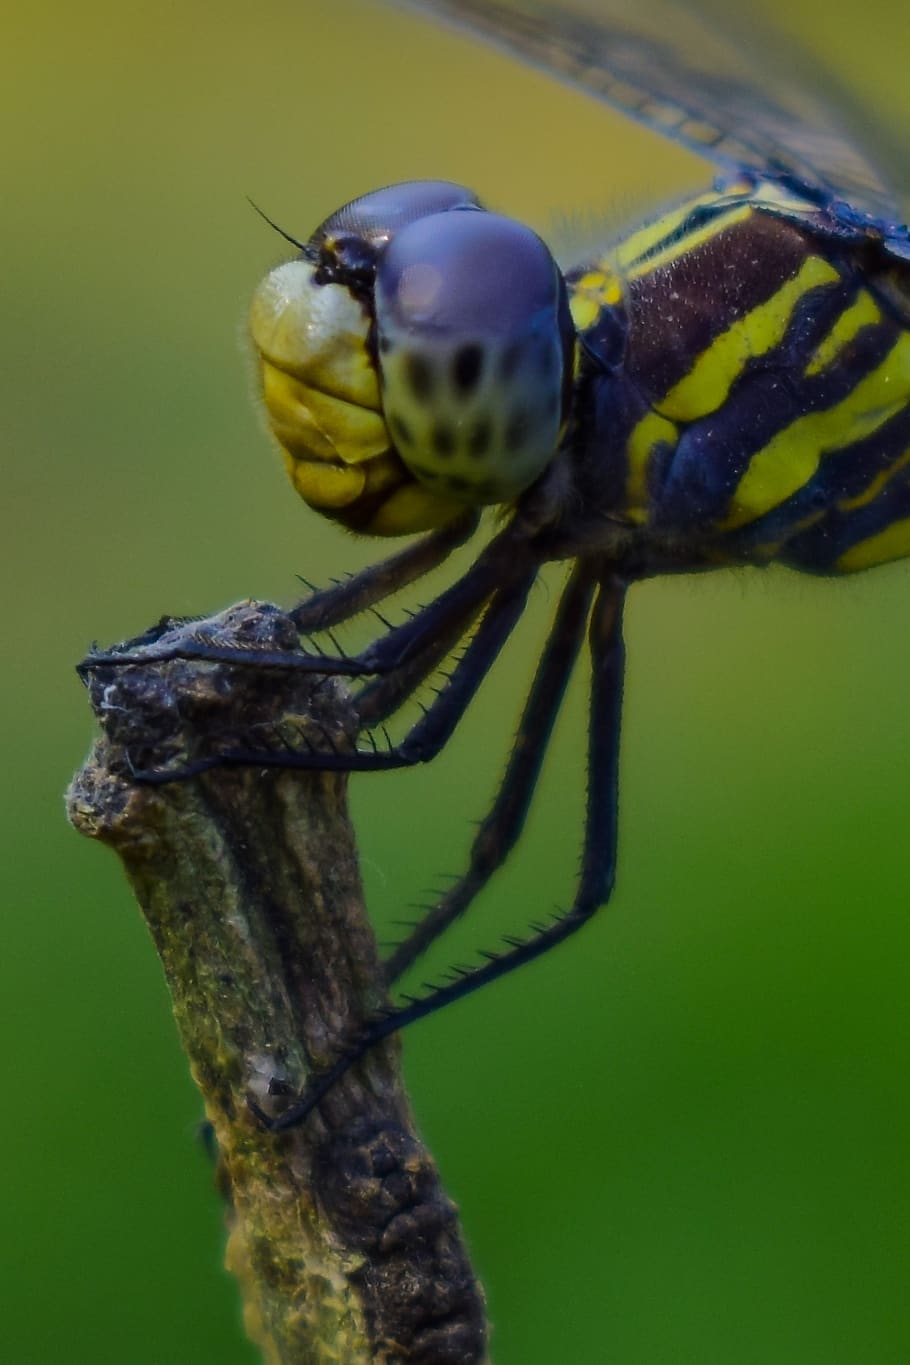 dragonfly, nature, macro, insects, images, portrait, animal wildlife, animal themes, animals in the wild, insect